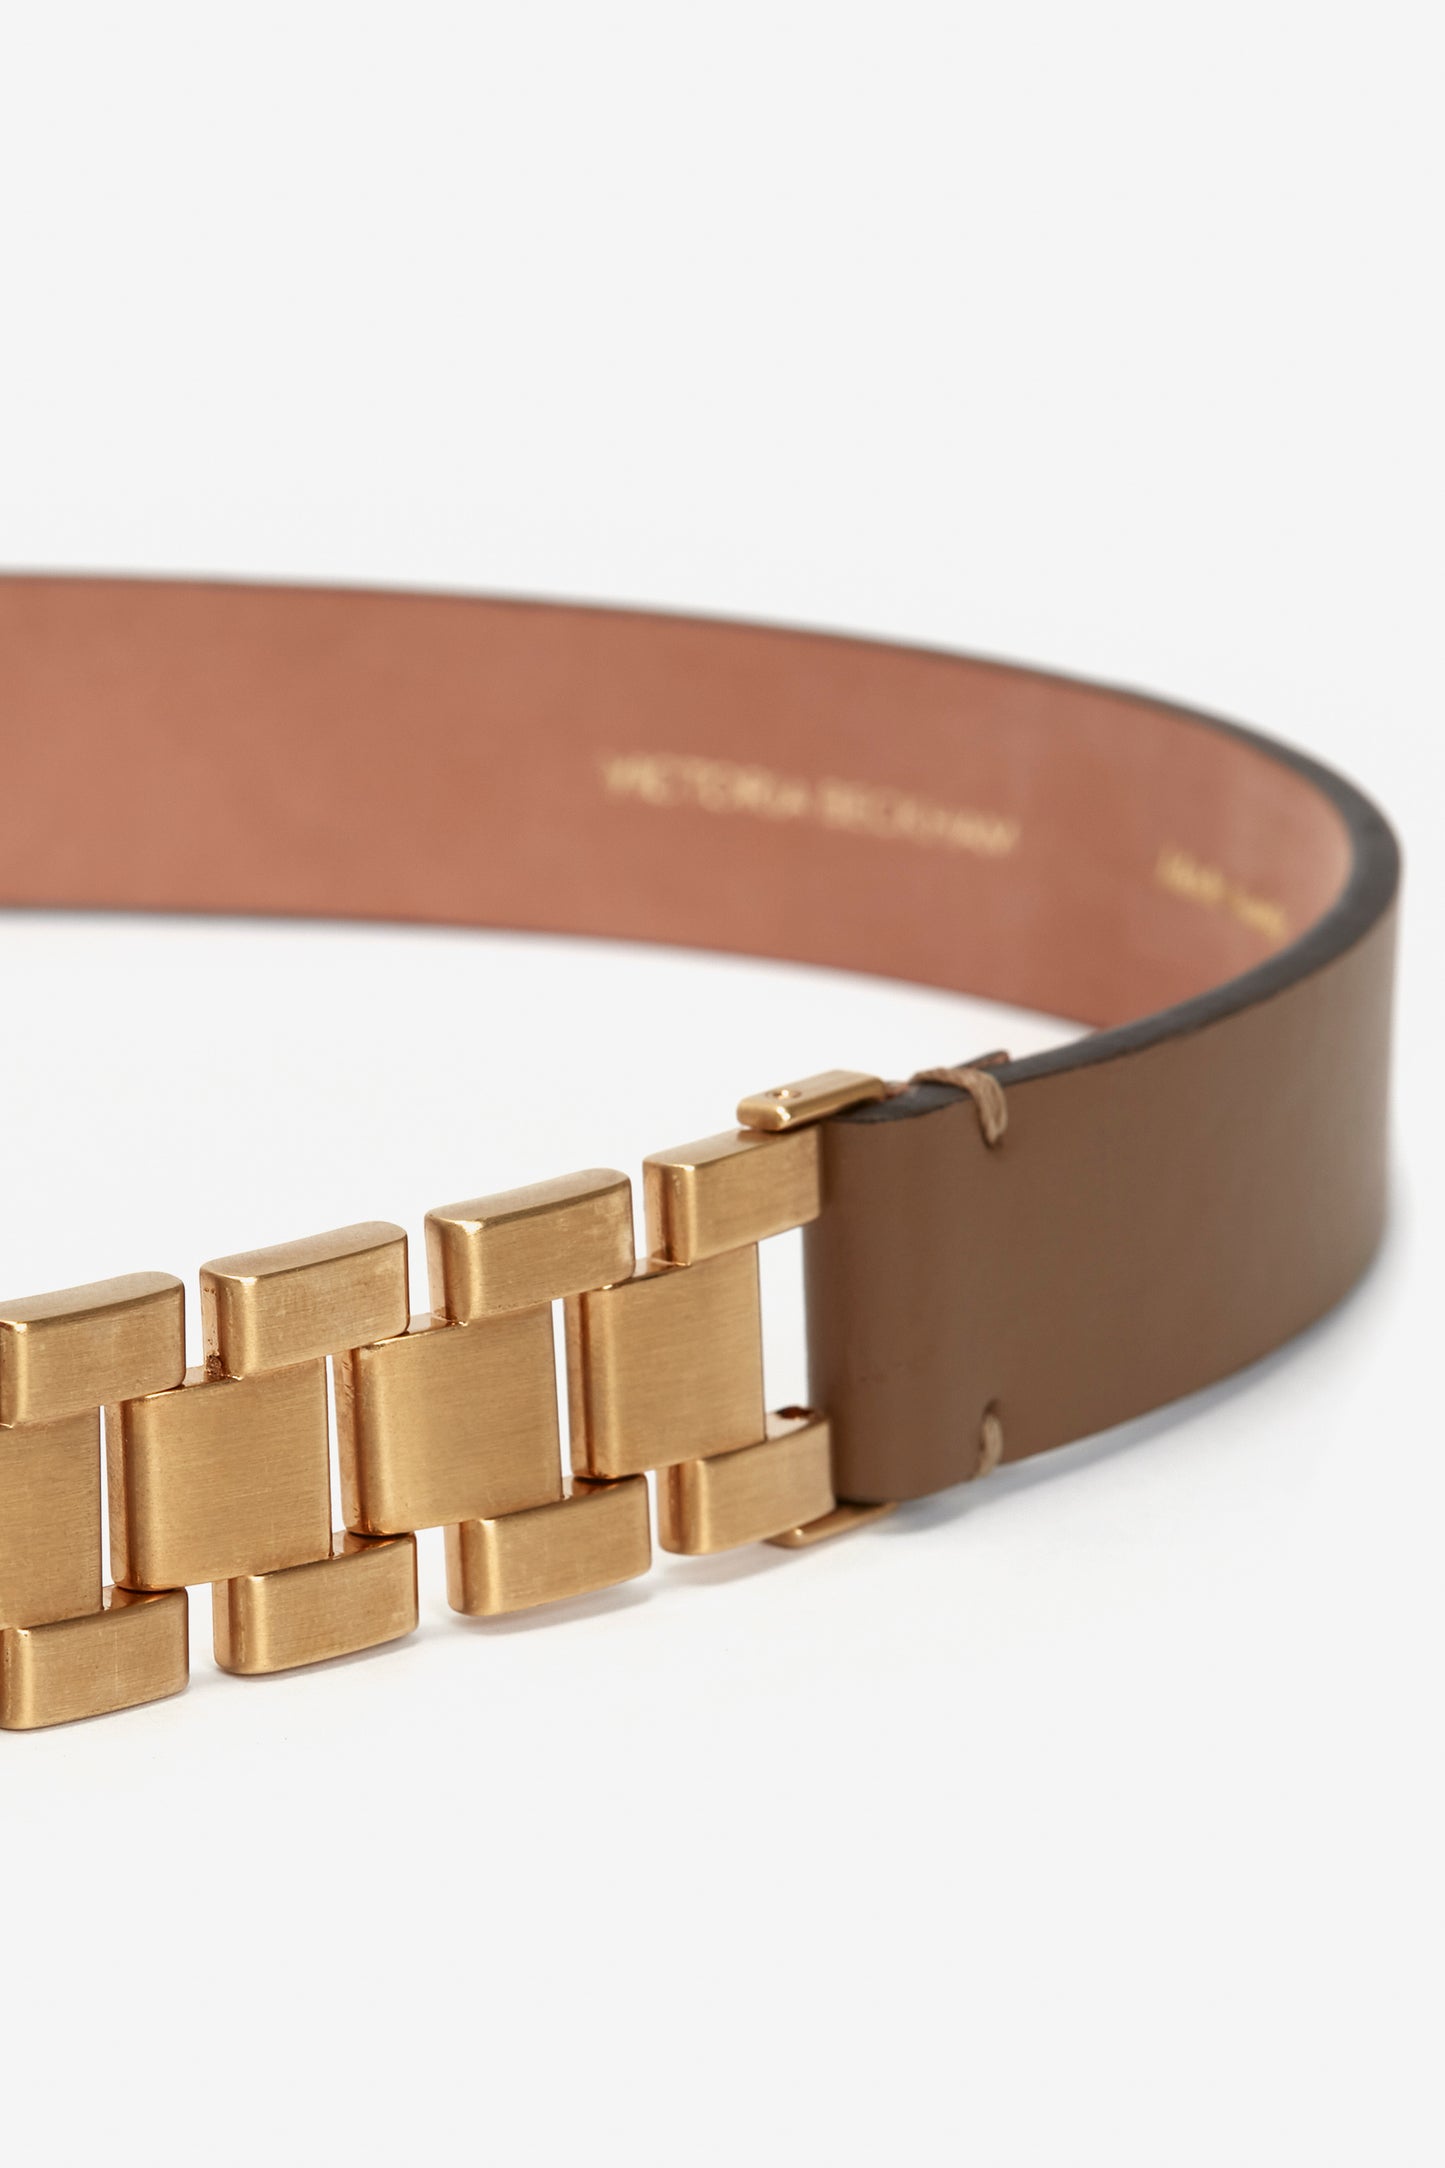 Close-up of a Victoria Beckham UK Watch Strap Detail Belt in Khaki-Brown featuring a gold metallic link buckle, isolated on a white background.